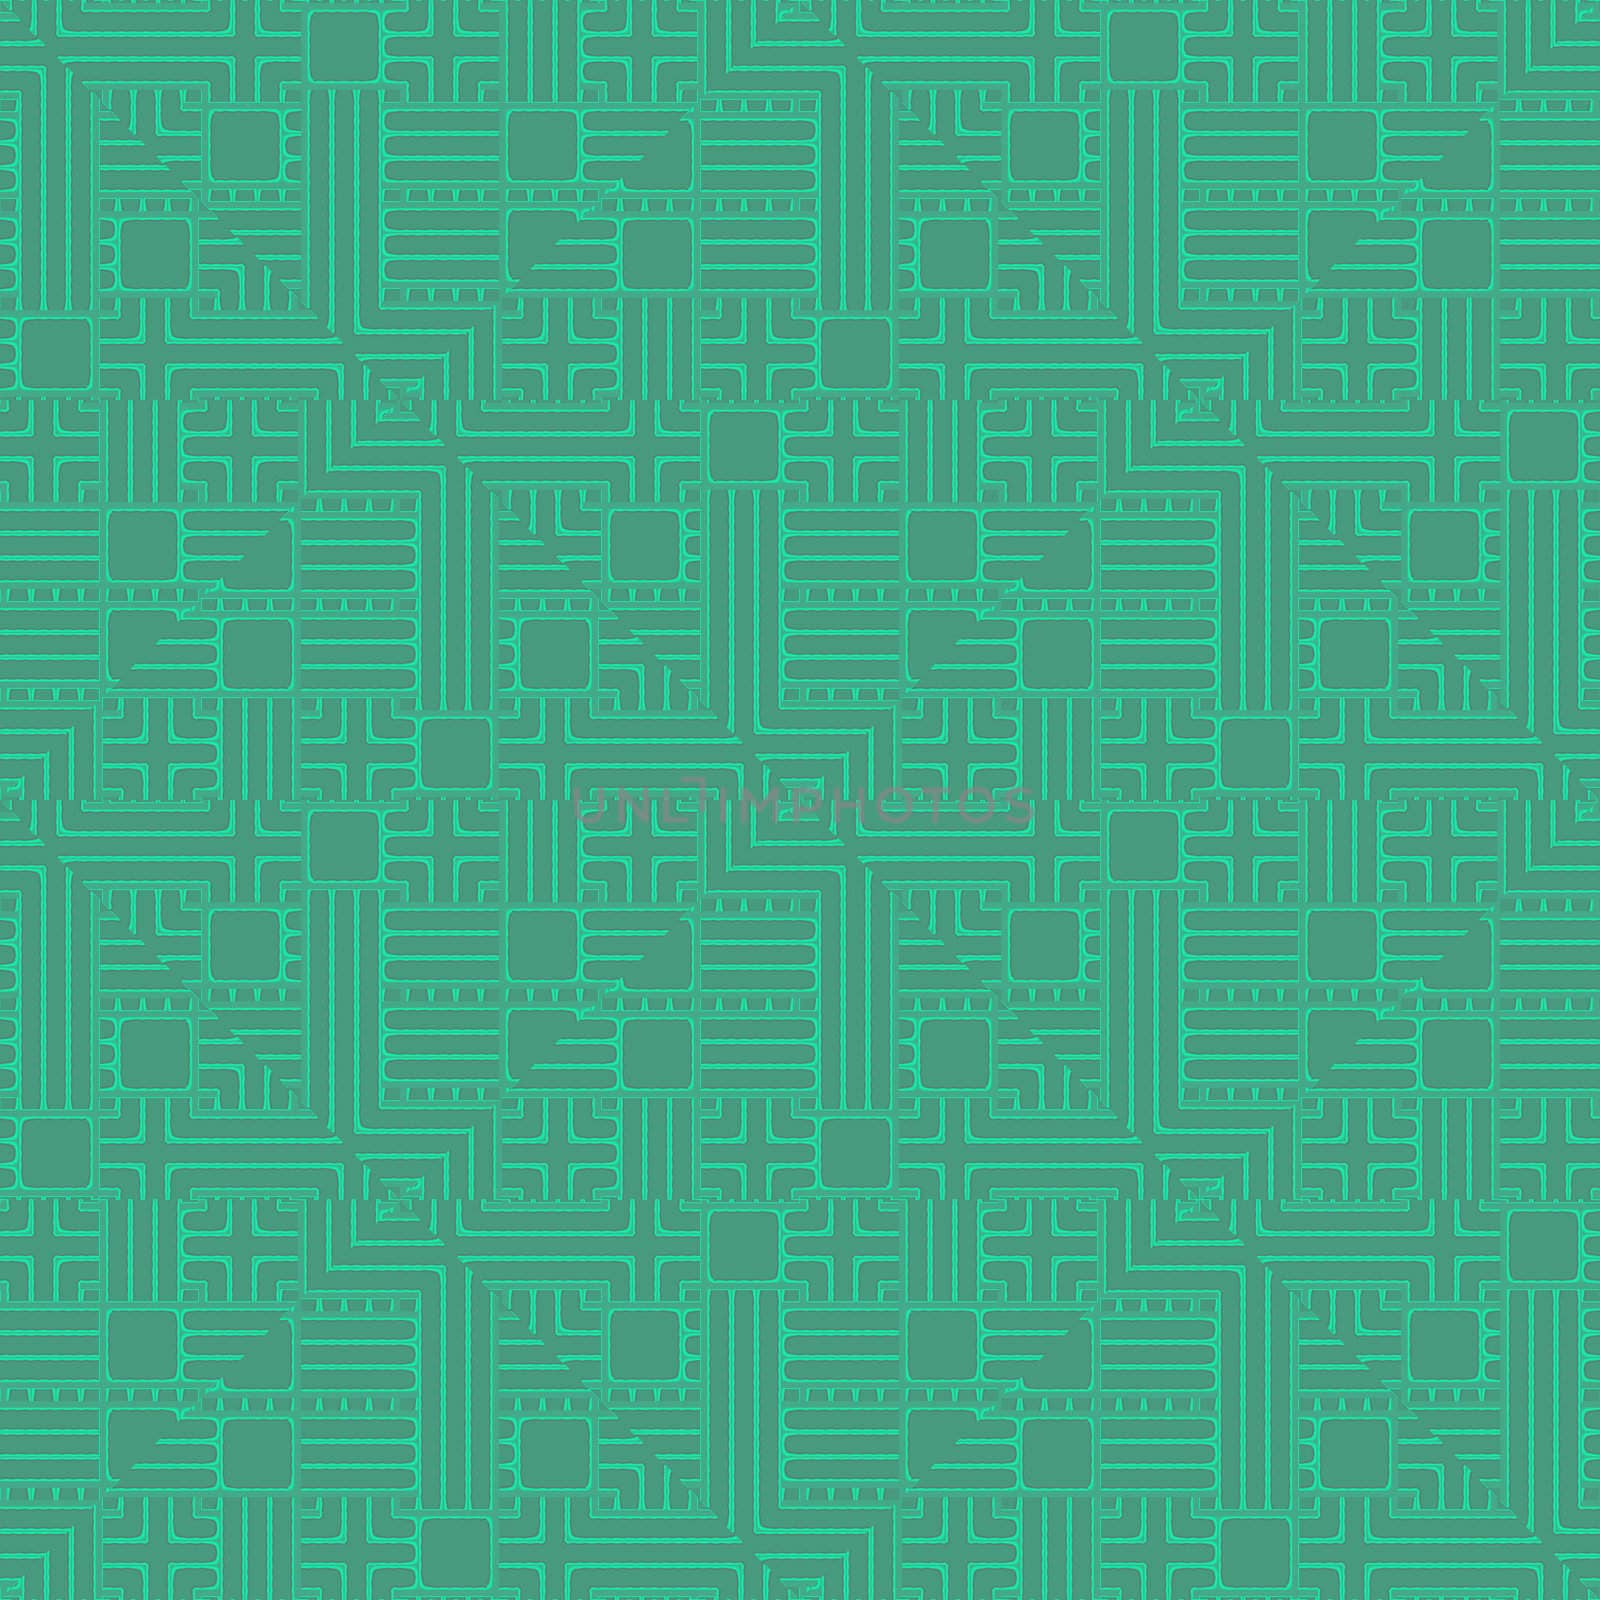 Seamless repeating circuit board design in green and blue